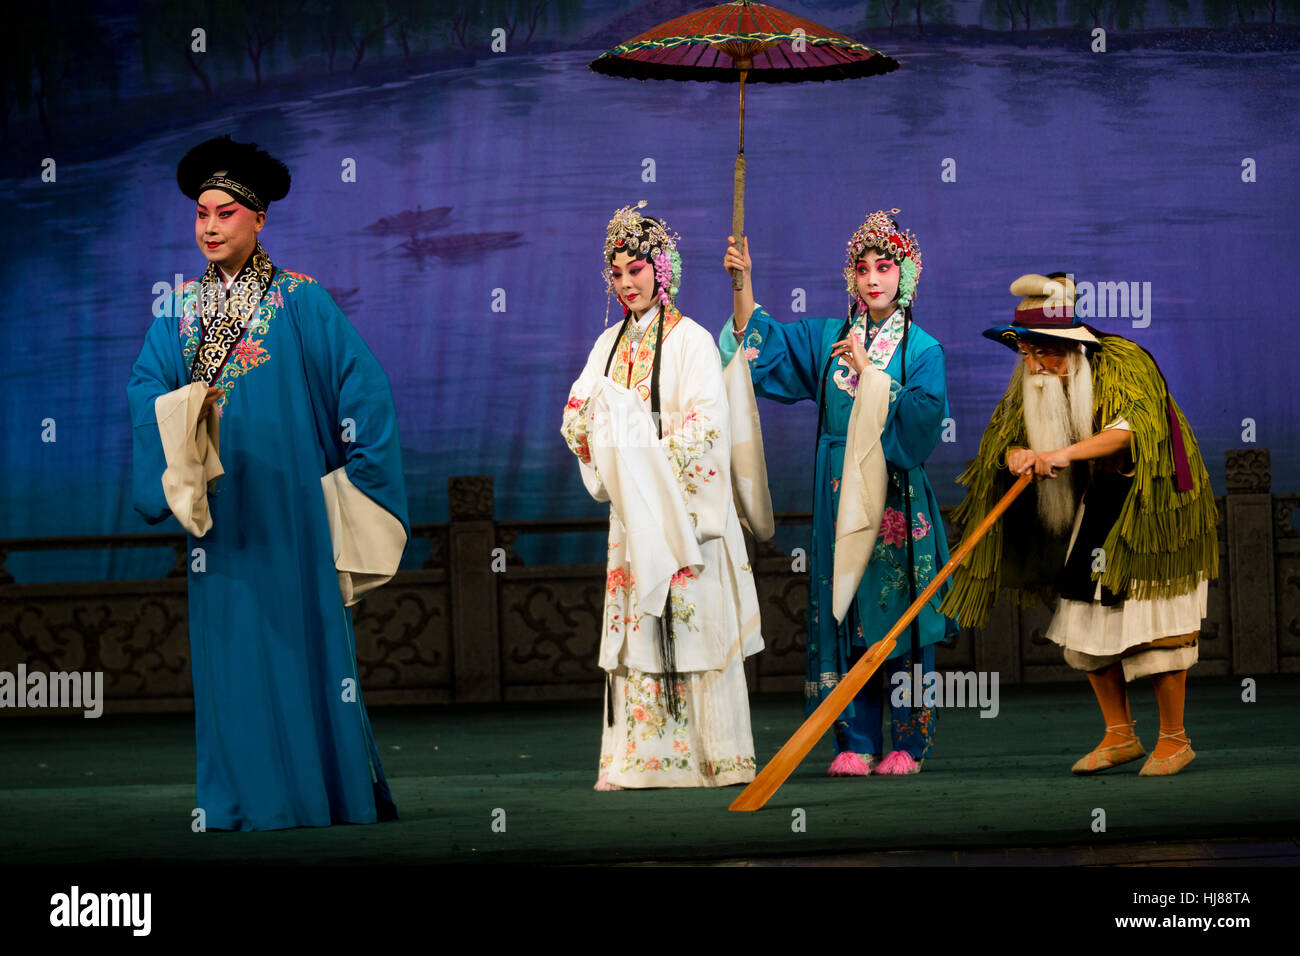 Actors of the Beijing Opera Troupe perform the famous story 'The Legend of the White Snake' at a stage in Moscow Stock Photo